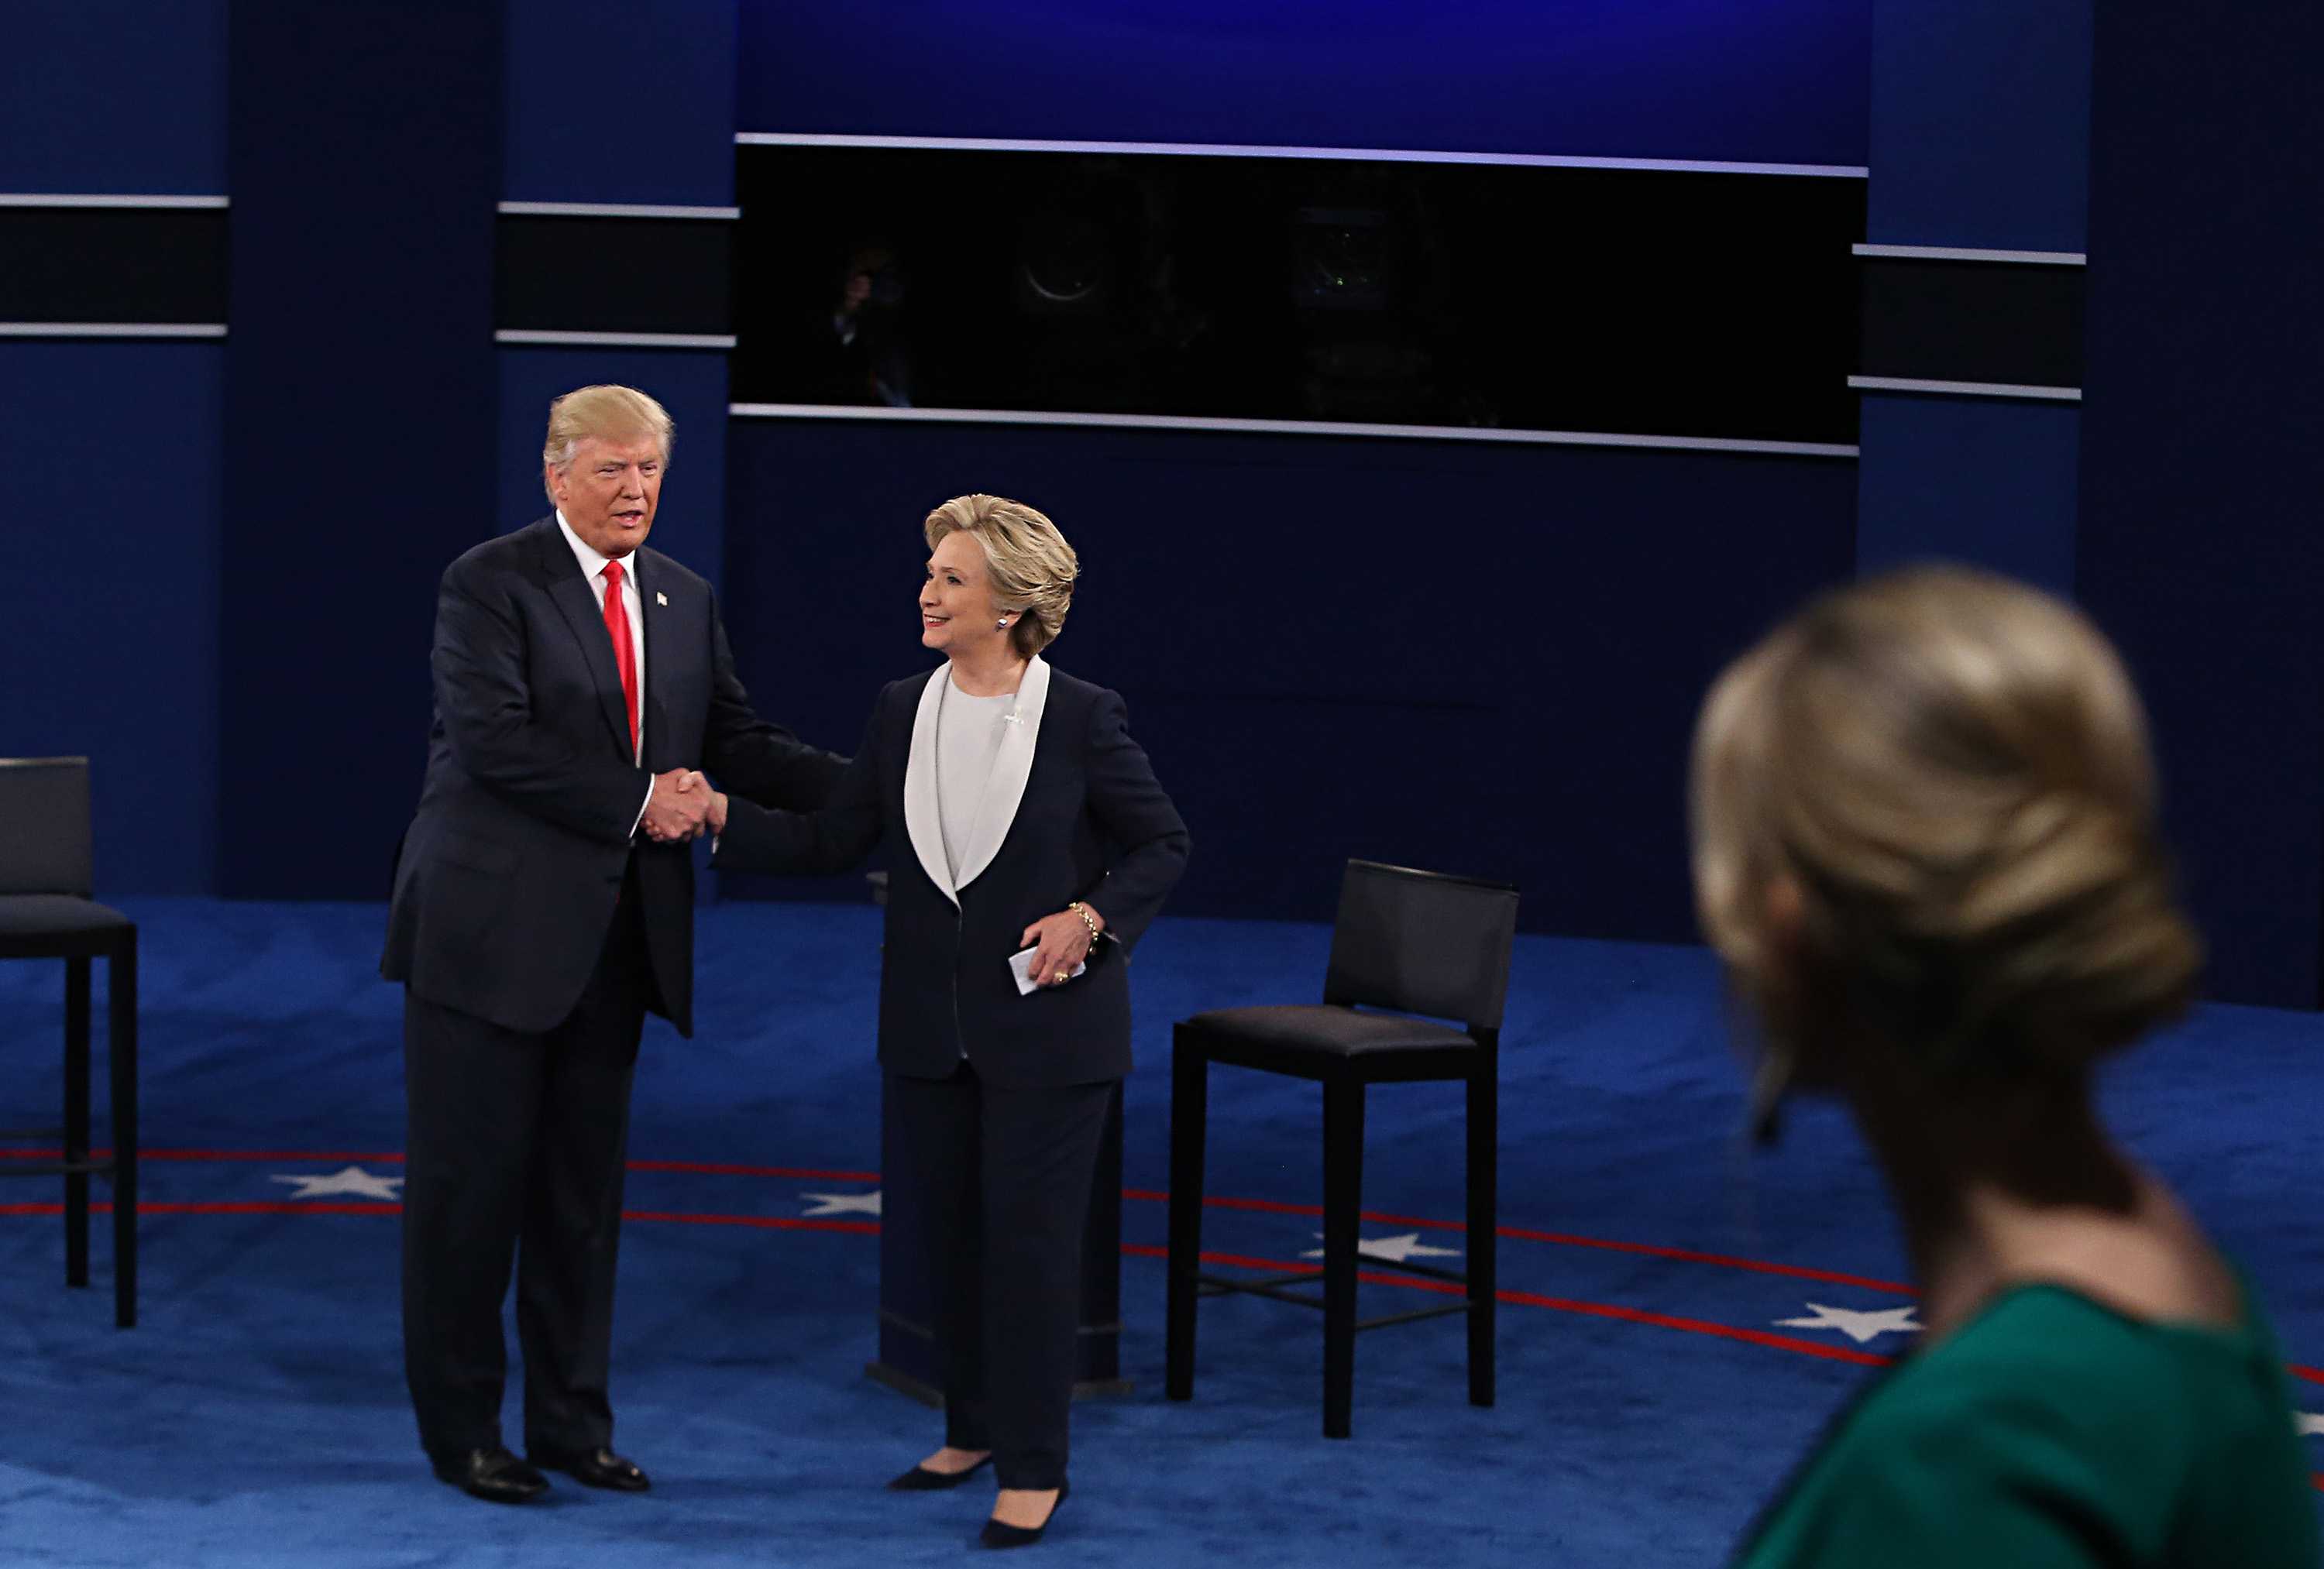 Trump+and+Clinton+shake+hands+after+debate